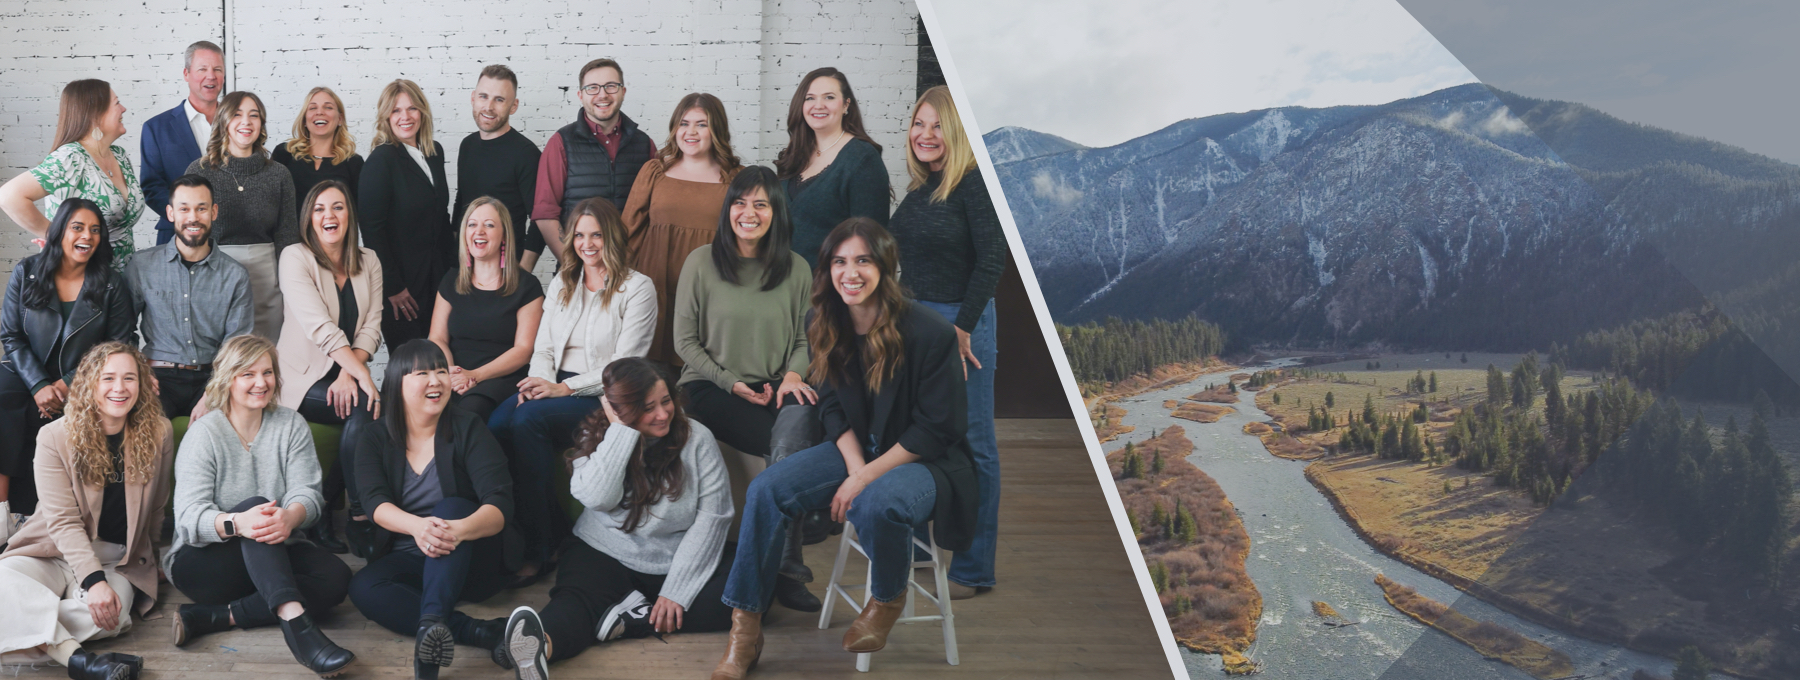 Boutique Marketing Agencies Thrive in Montana